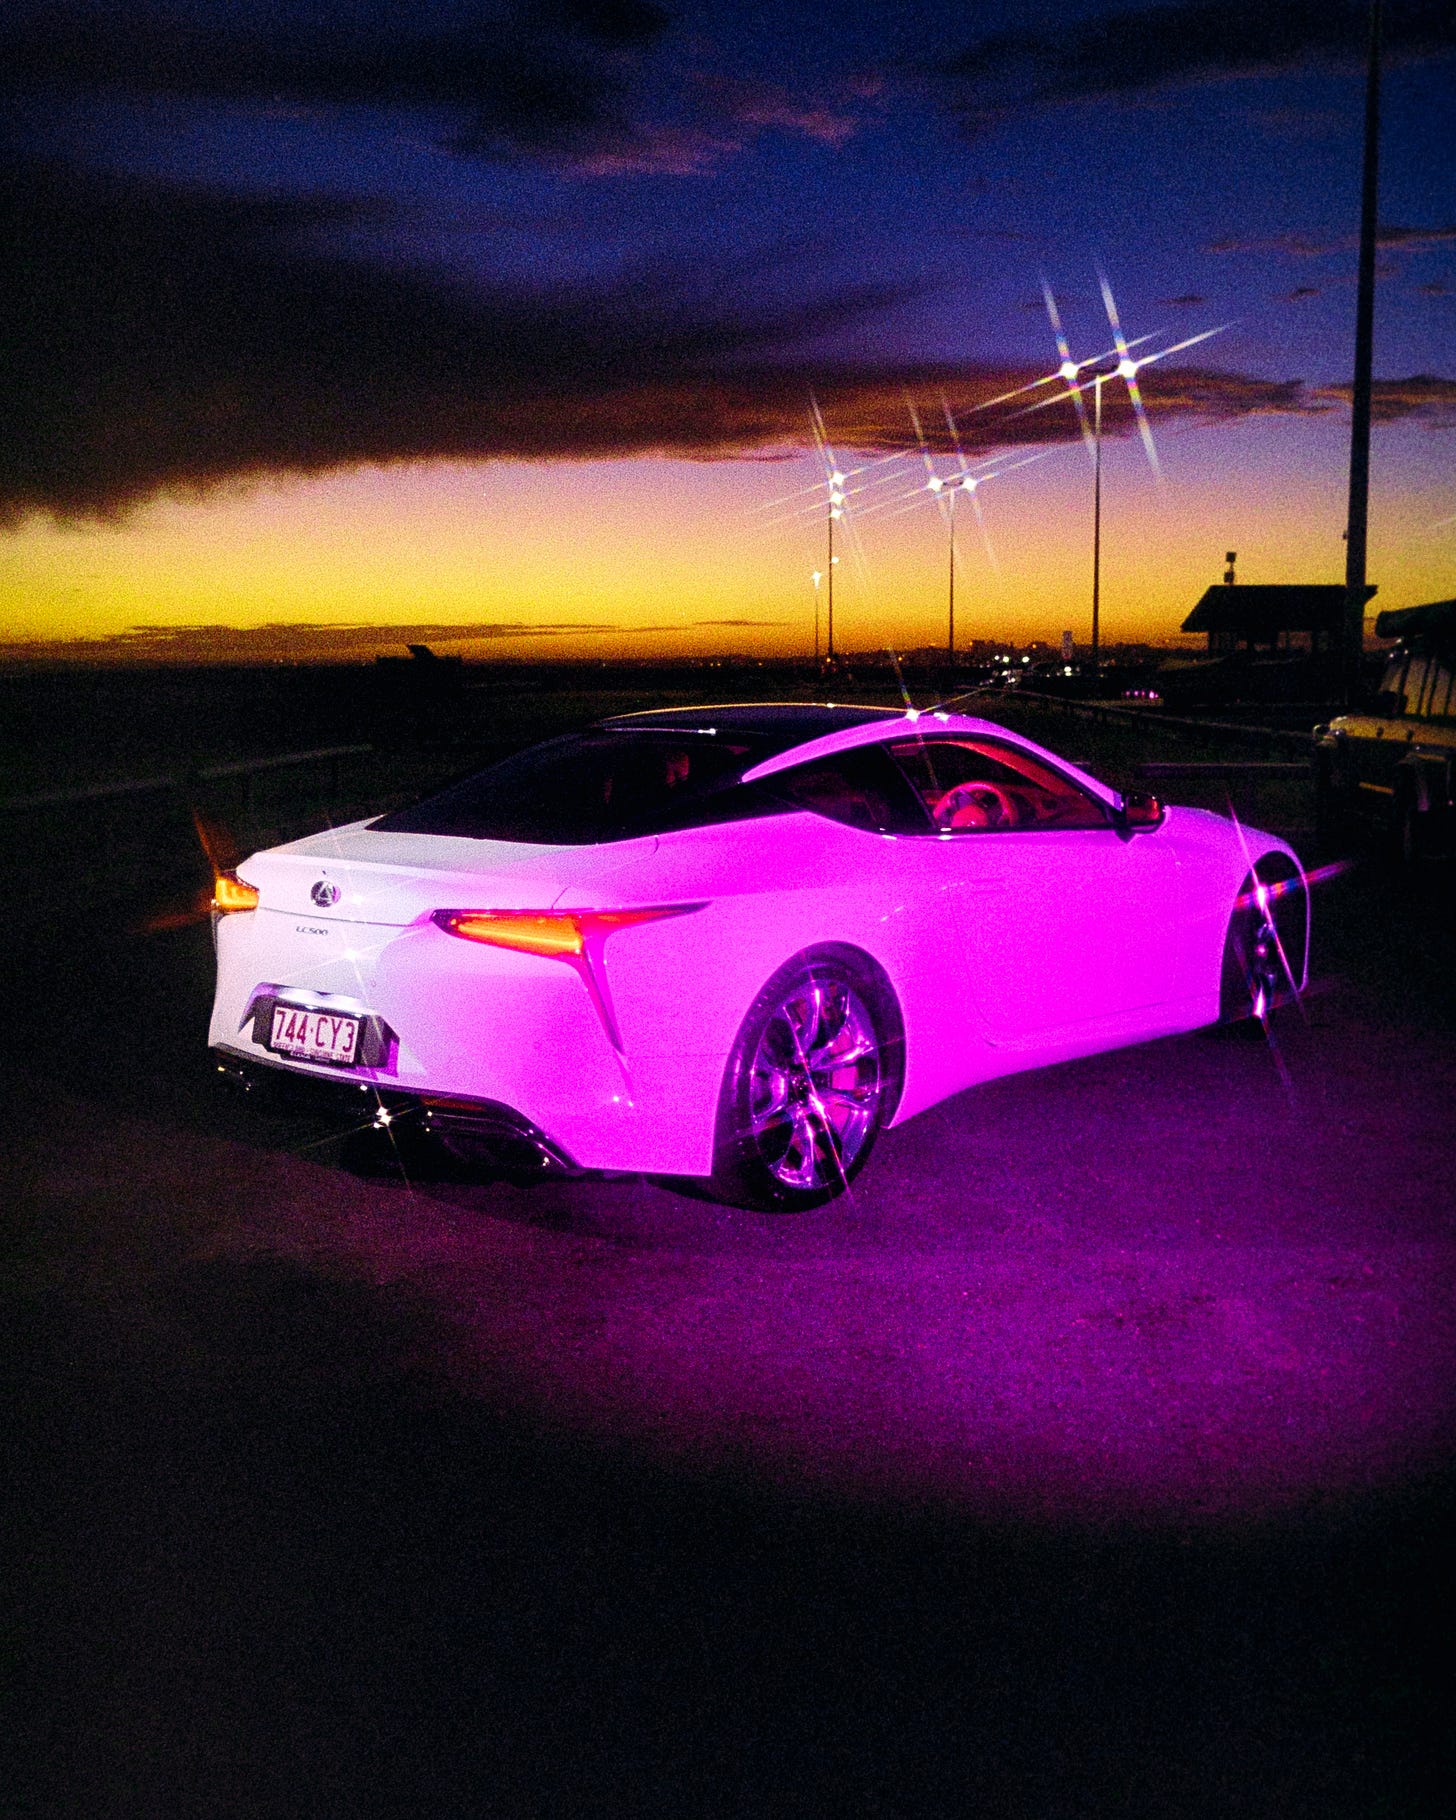 A very vibrant film shot of Clem's car, lit up by the X60 light, with the lingering sunset in the background. The filter used created dramatic starbursts on any highlighted area.